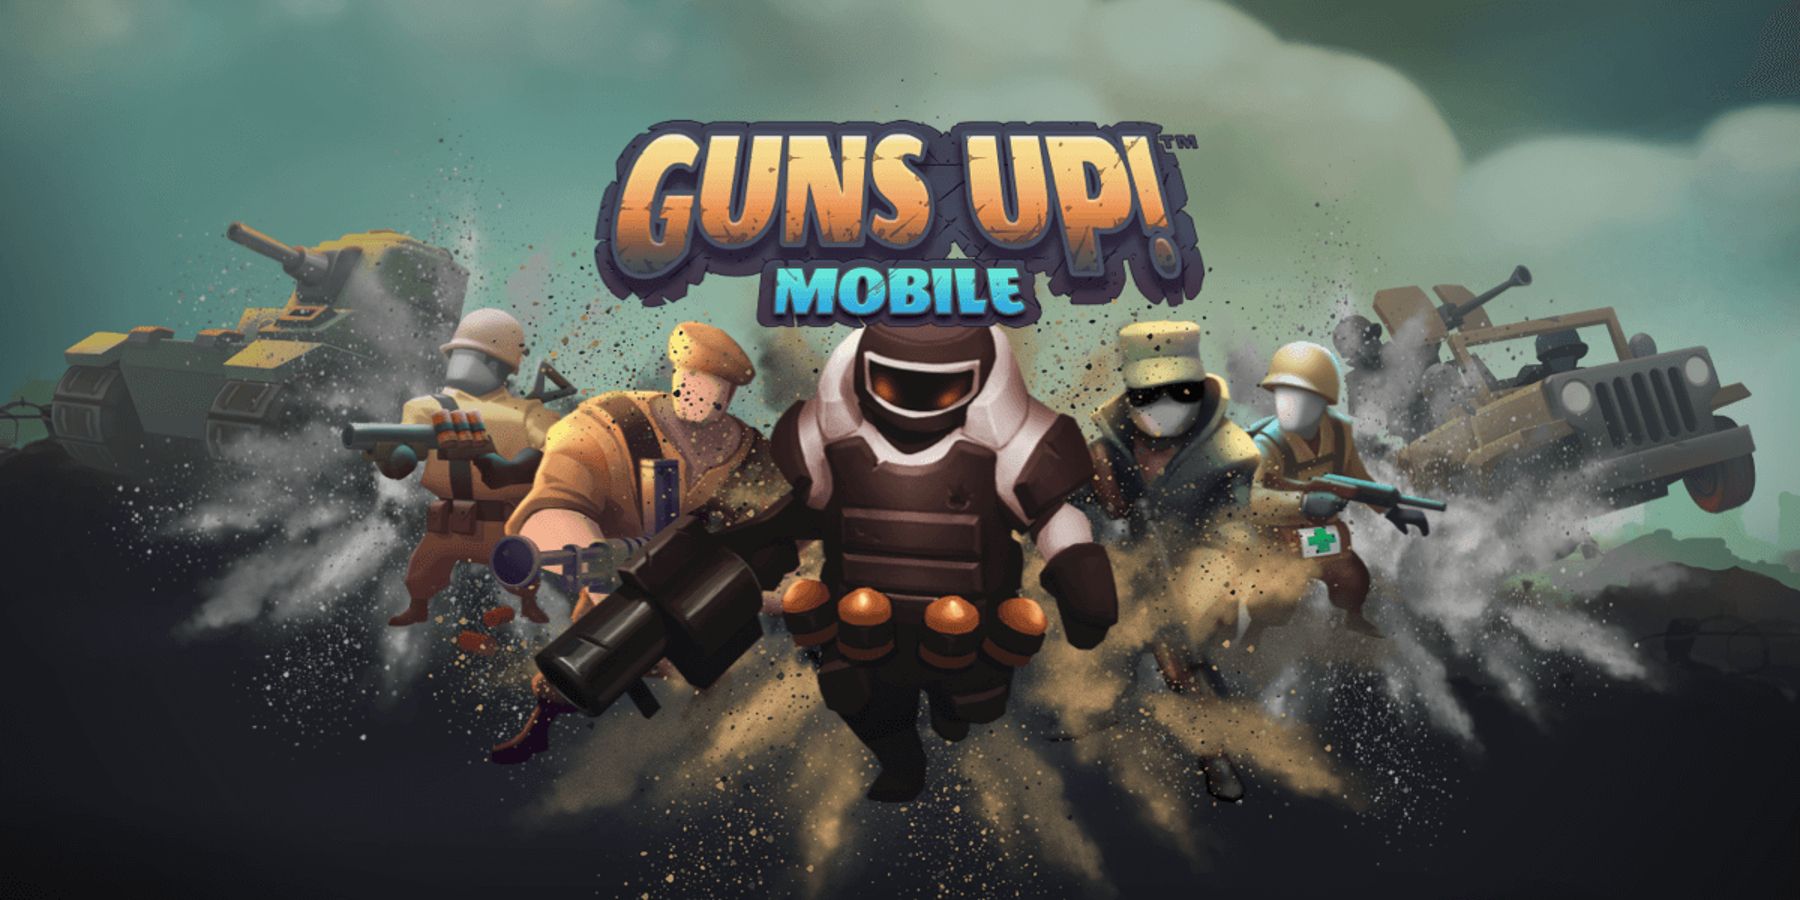 A promotional image for the mobile game Guns Up! Mobile.